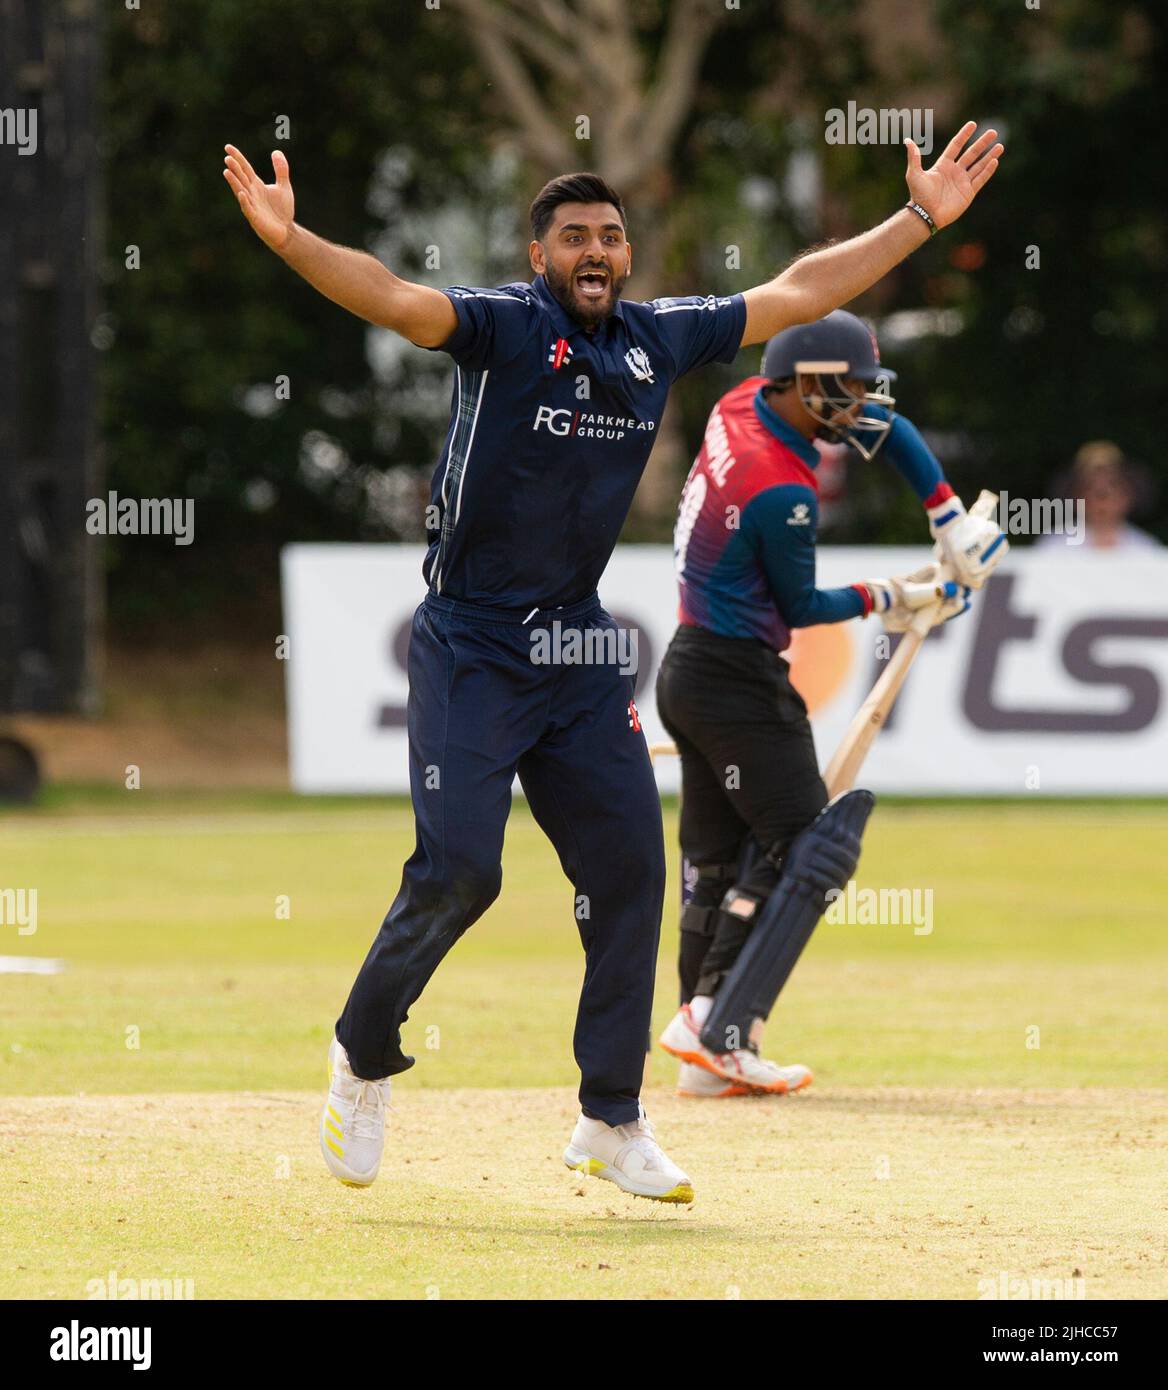 ICC Men's Cricket World Cup League 2 - Scotland v, Nepal. 17th July, 2022. Scotland take on Nepal for the second time in the ICC Div 2 Men's Cricket World Cup League 2 at Titwood, Glasgow. Pic shows: Huge appeal by Scotland's Safyaan Sharif. Credit: Ian Jacobs/Alamy Live News Stock Photo